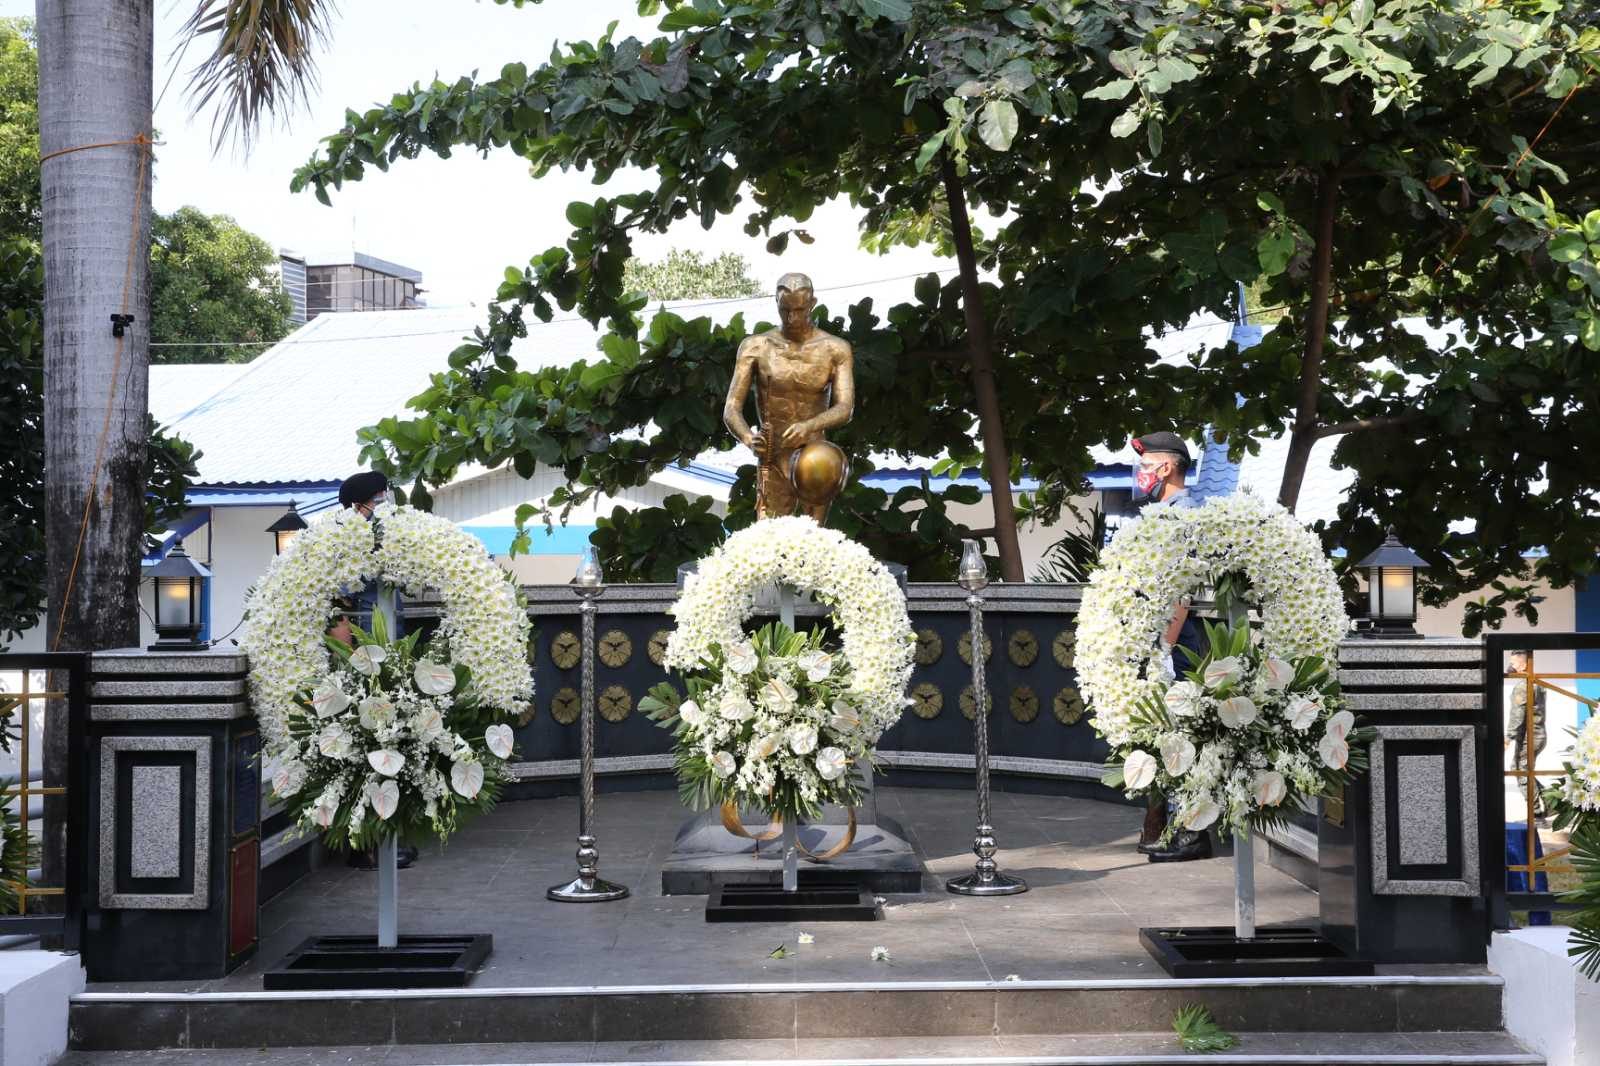 LOOK: PNP commemorates SAF 44, 7 years after deadly clash